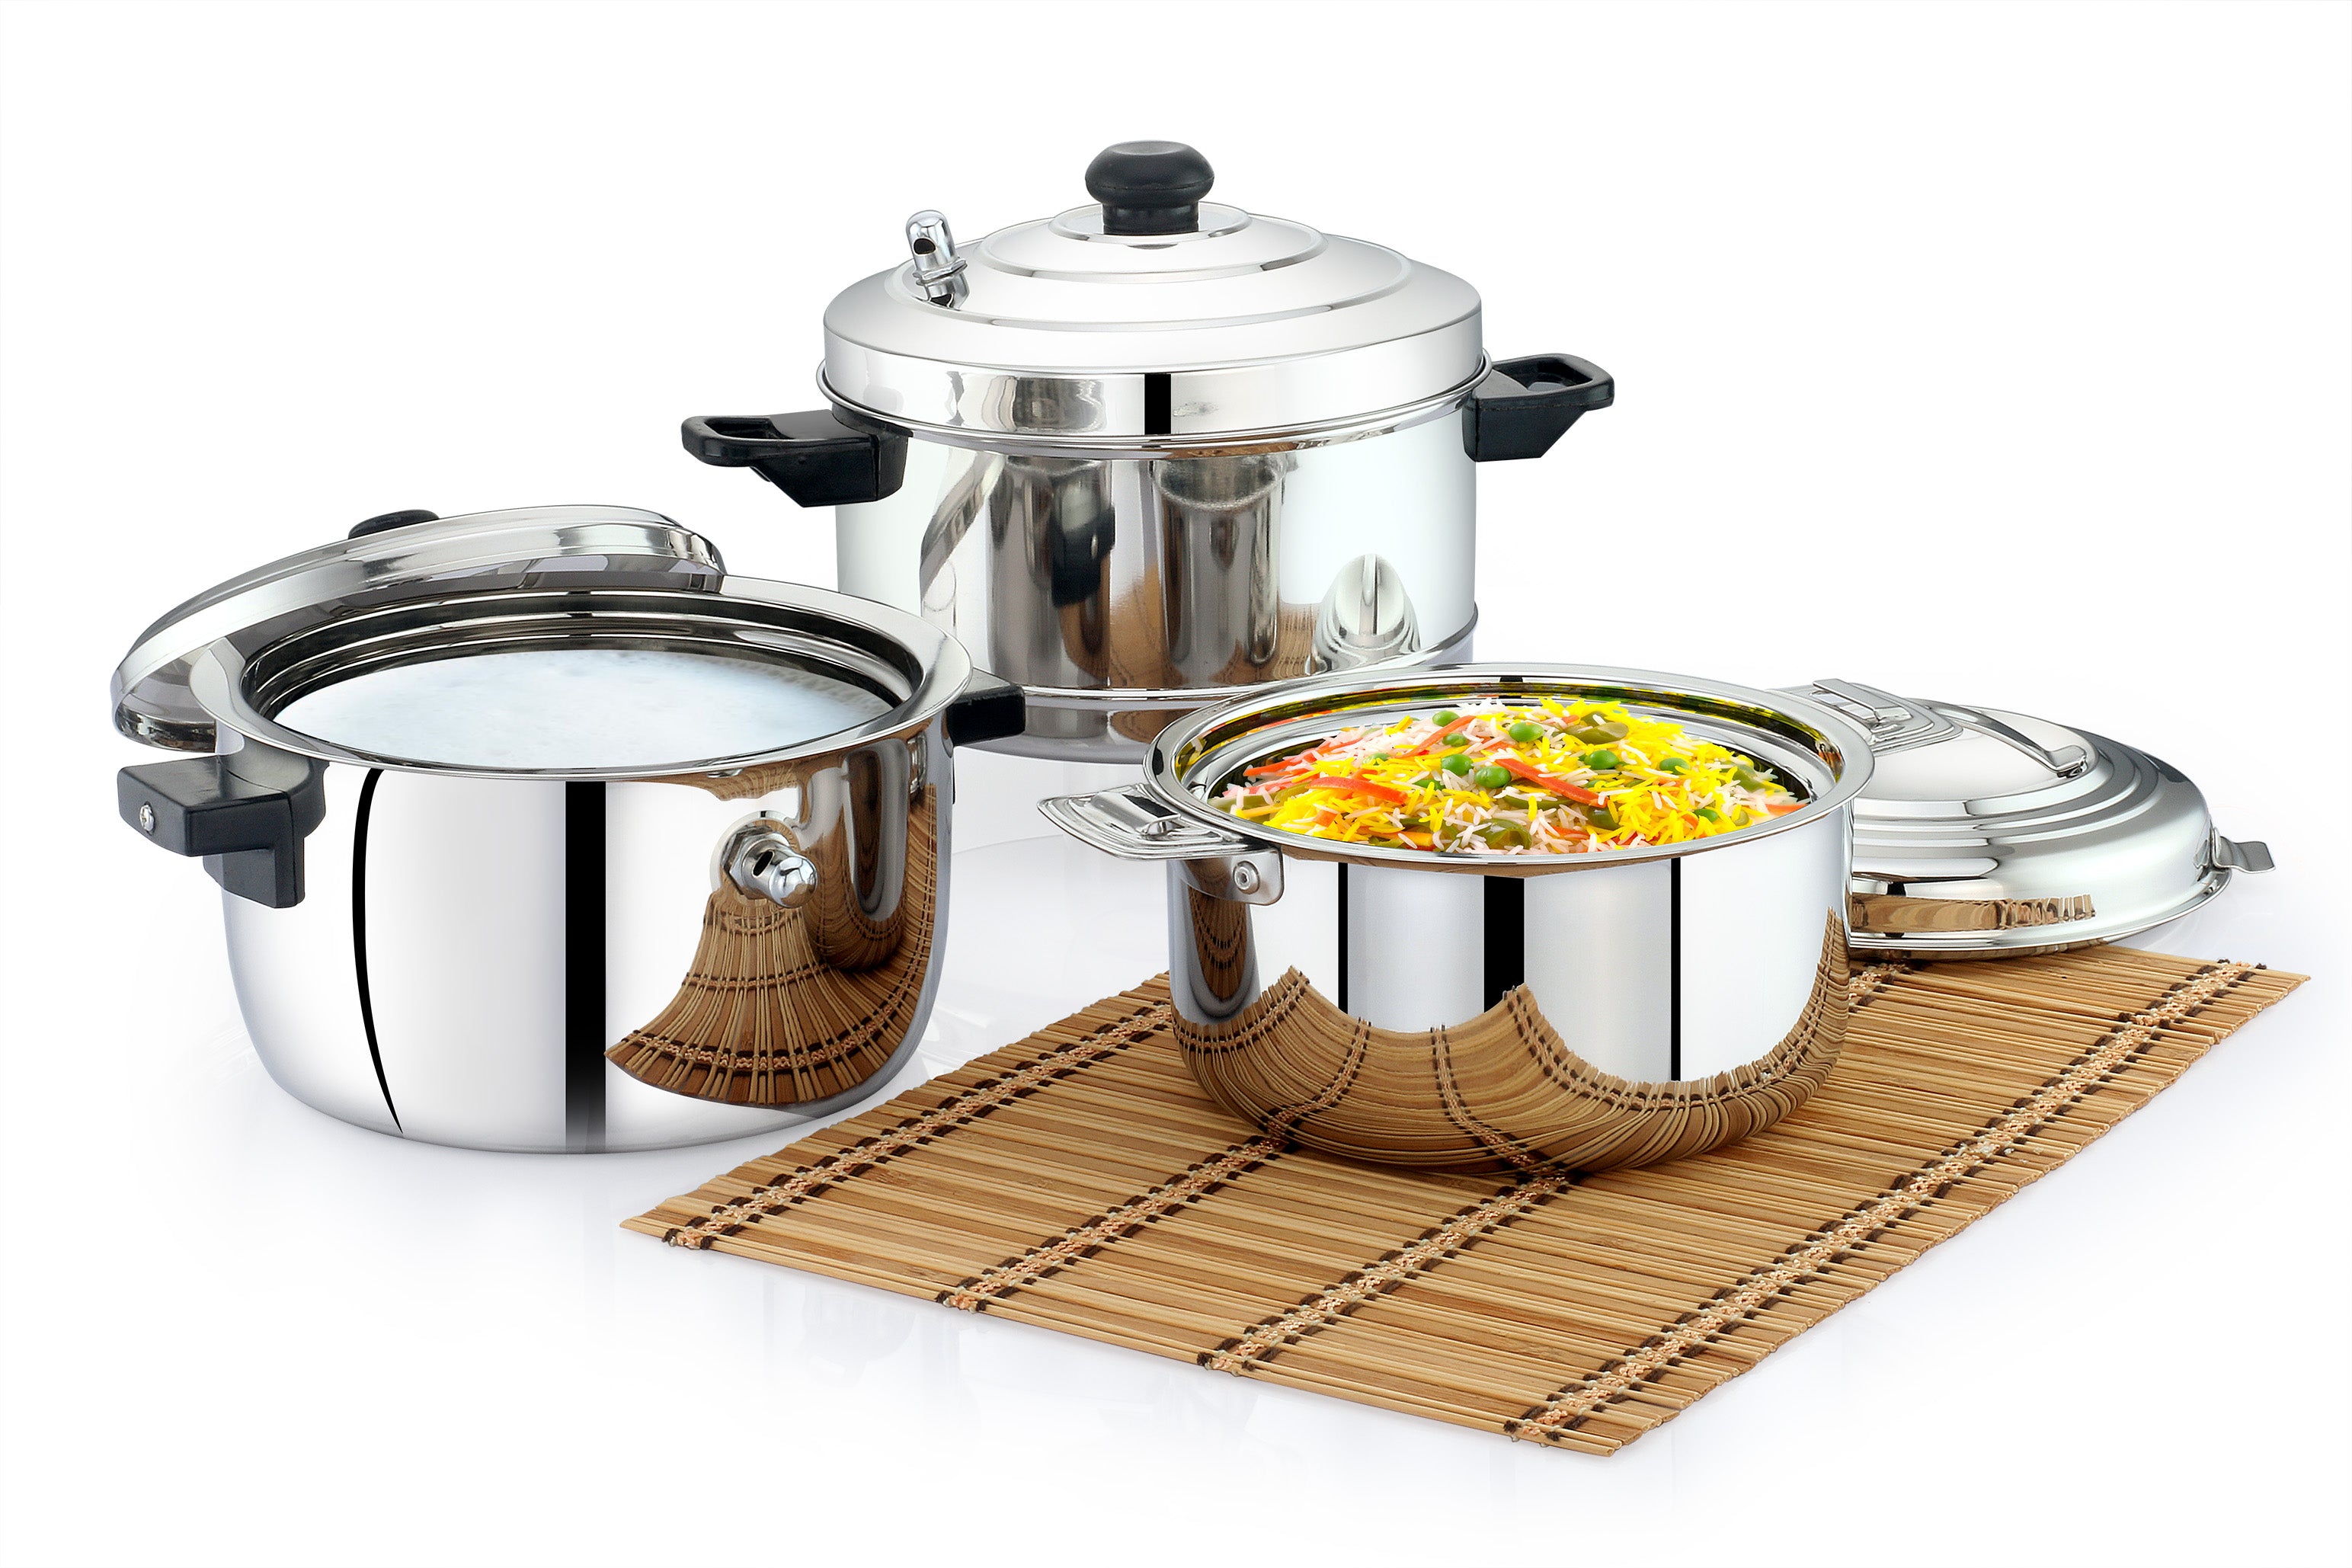 PONGAL OFFER #3: AMAZE - GIFTSET( MILK COOKER - 2000ML, IDLI COOKER with 4 PLATES, BLUEBELL CASSEROLE - 1500ML) 48% OFF